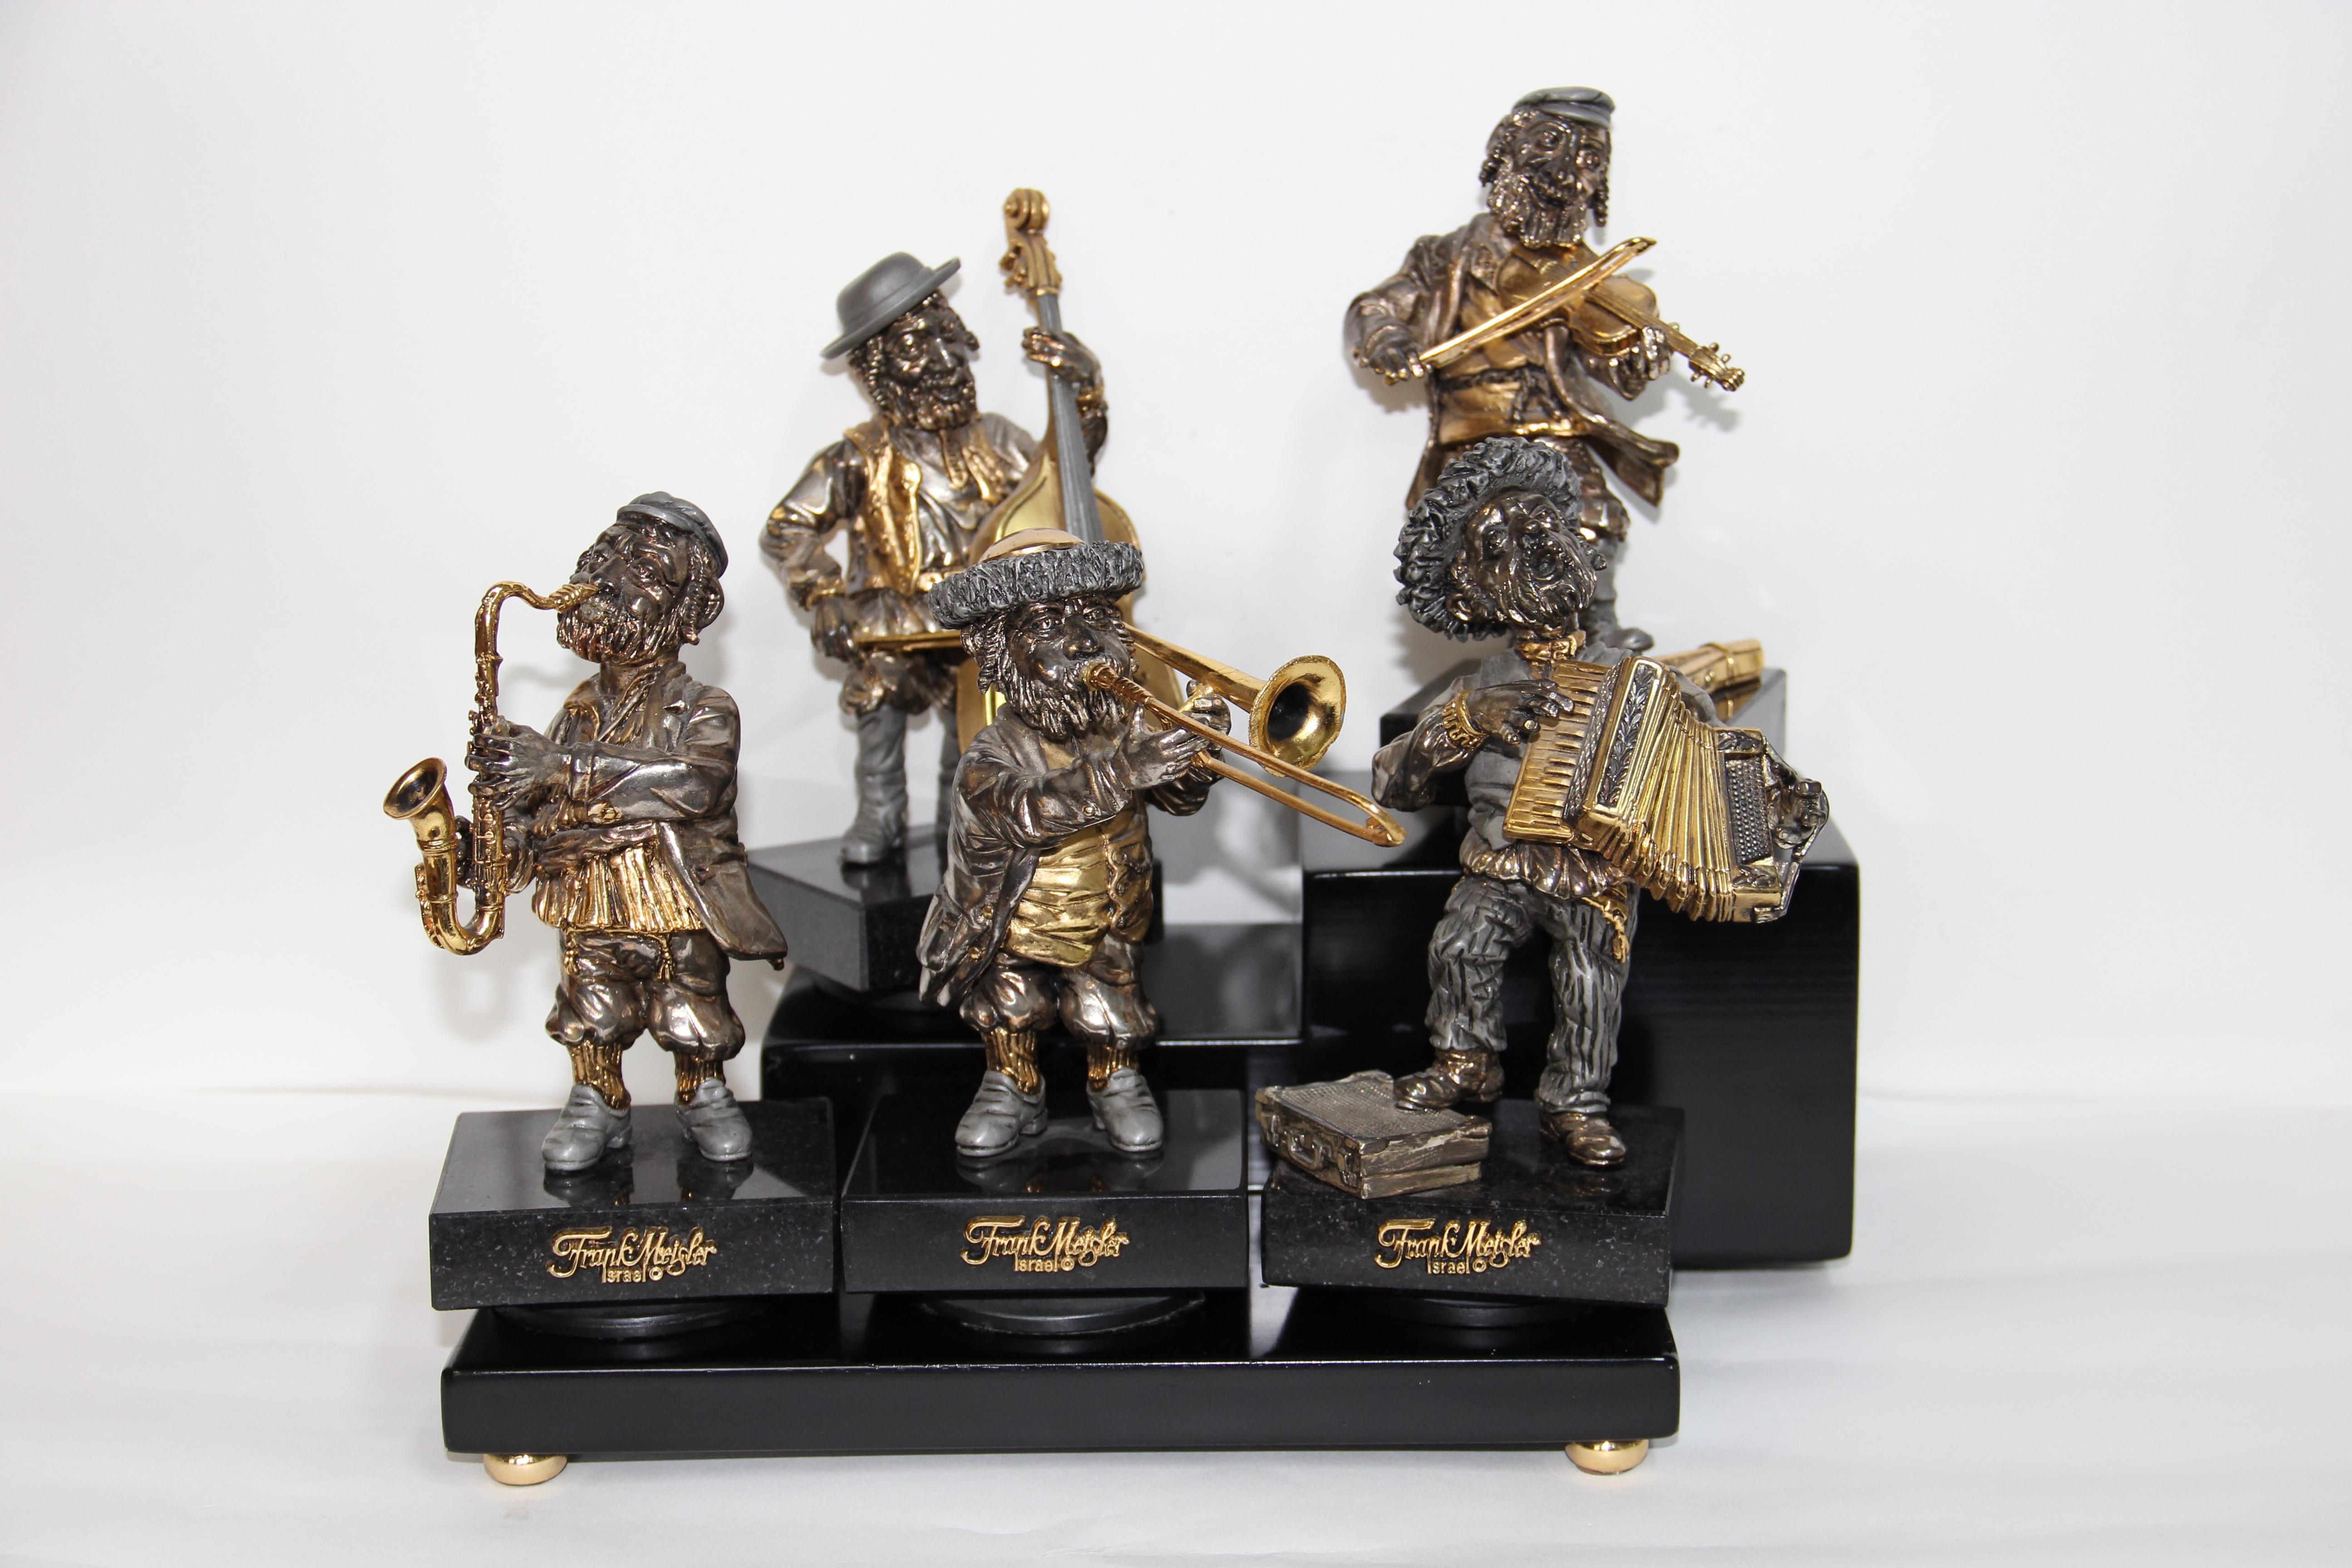 Extremely decorative figures group of the well-known artist Frank Meisler.

Metal, probably silver plated and gilded.
Musician band consisting of five figures.
Including pedestal.

Average height including socle about 170mm.

Some